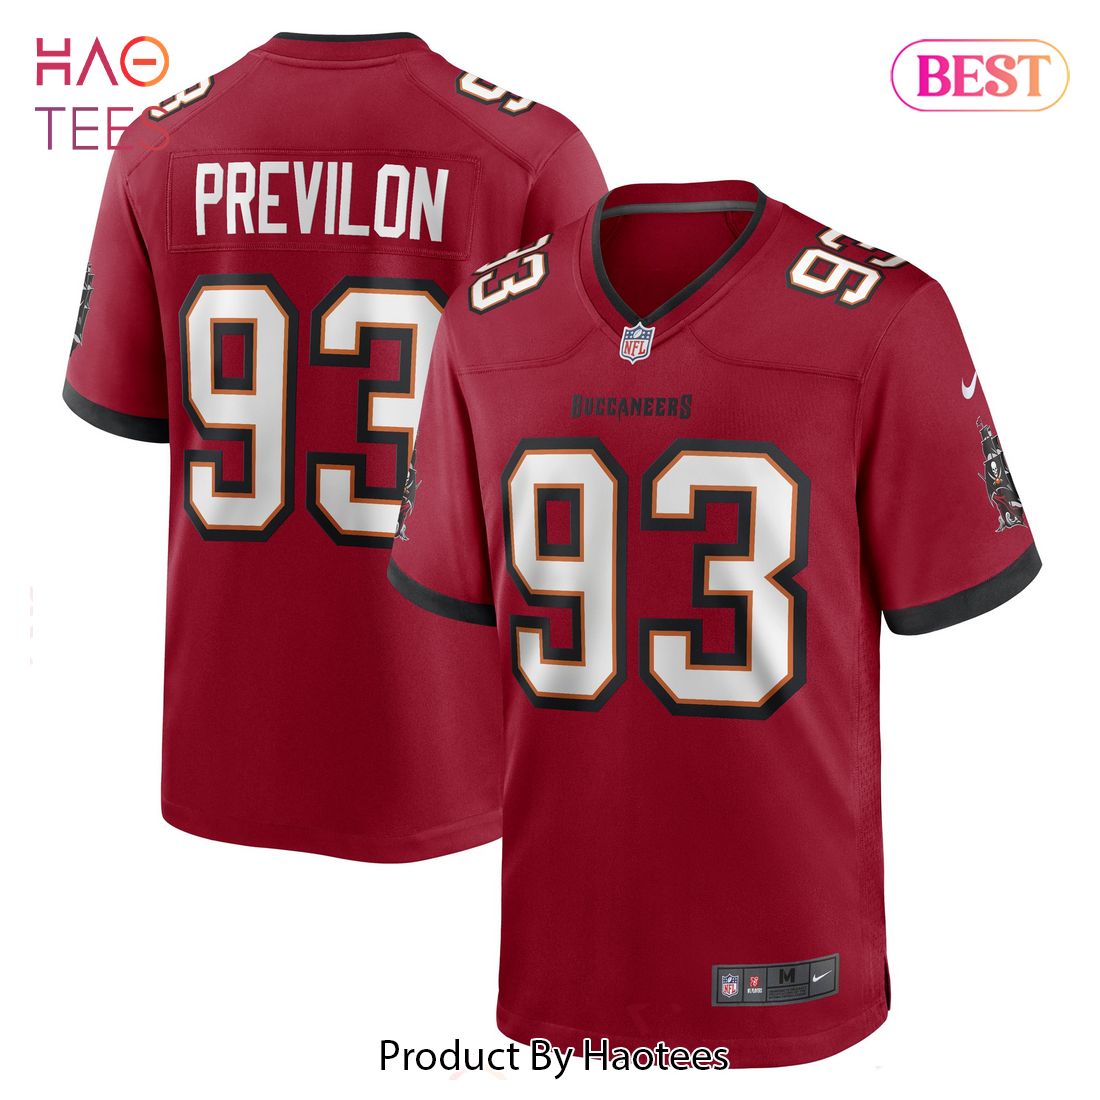 Willington Previlon Tampa Bay Buccaneers Nike Game Player Jersey Red